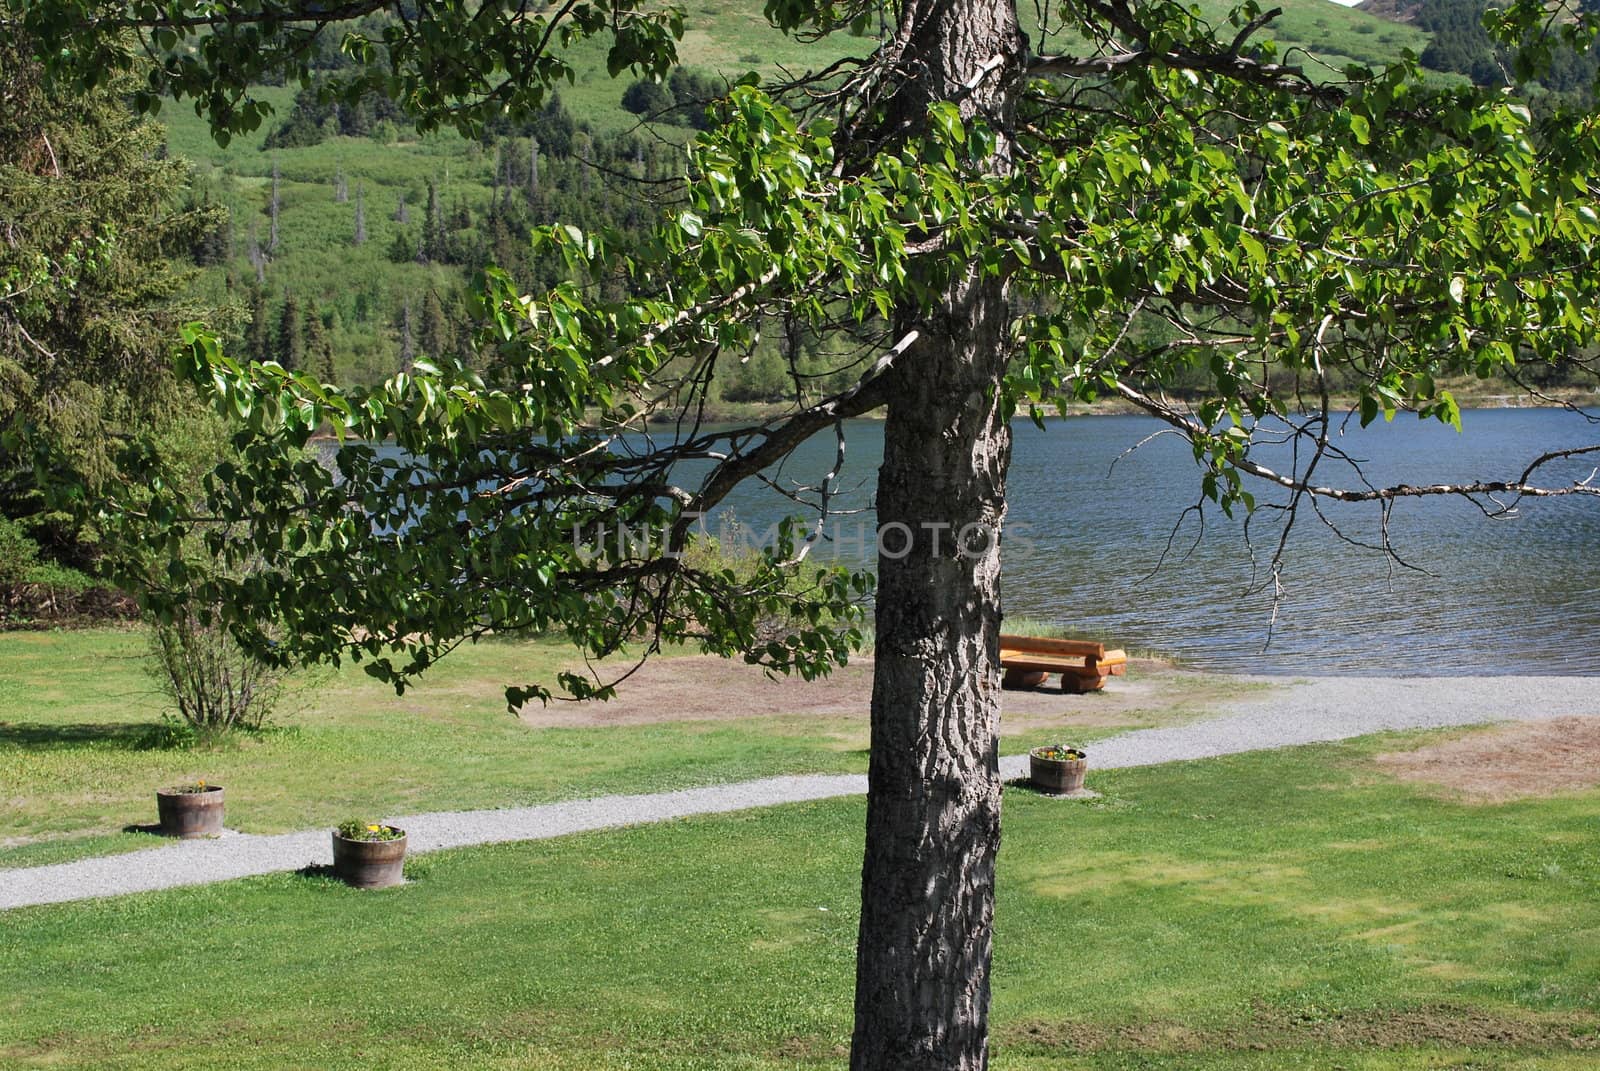 A grassy area by a clear mountain lake